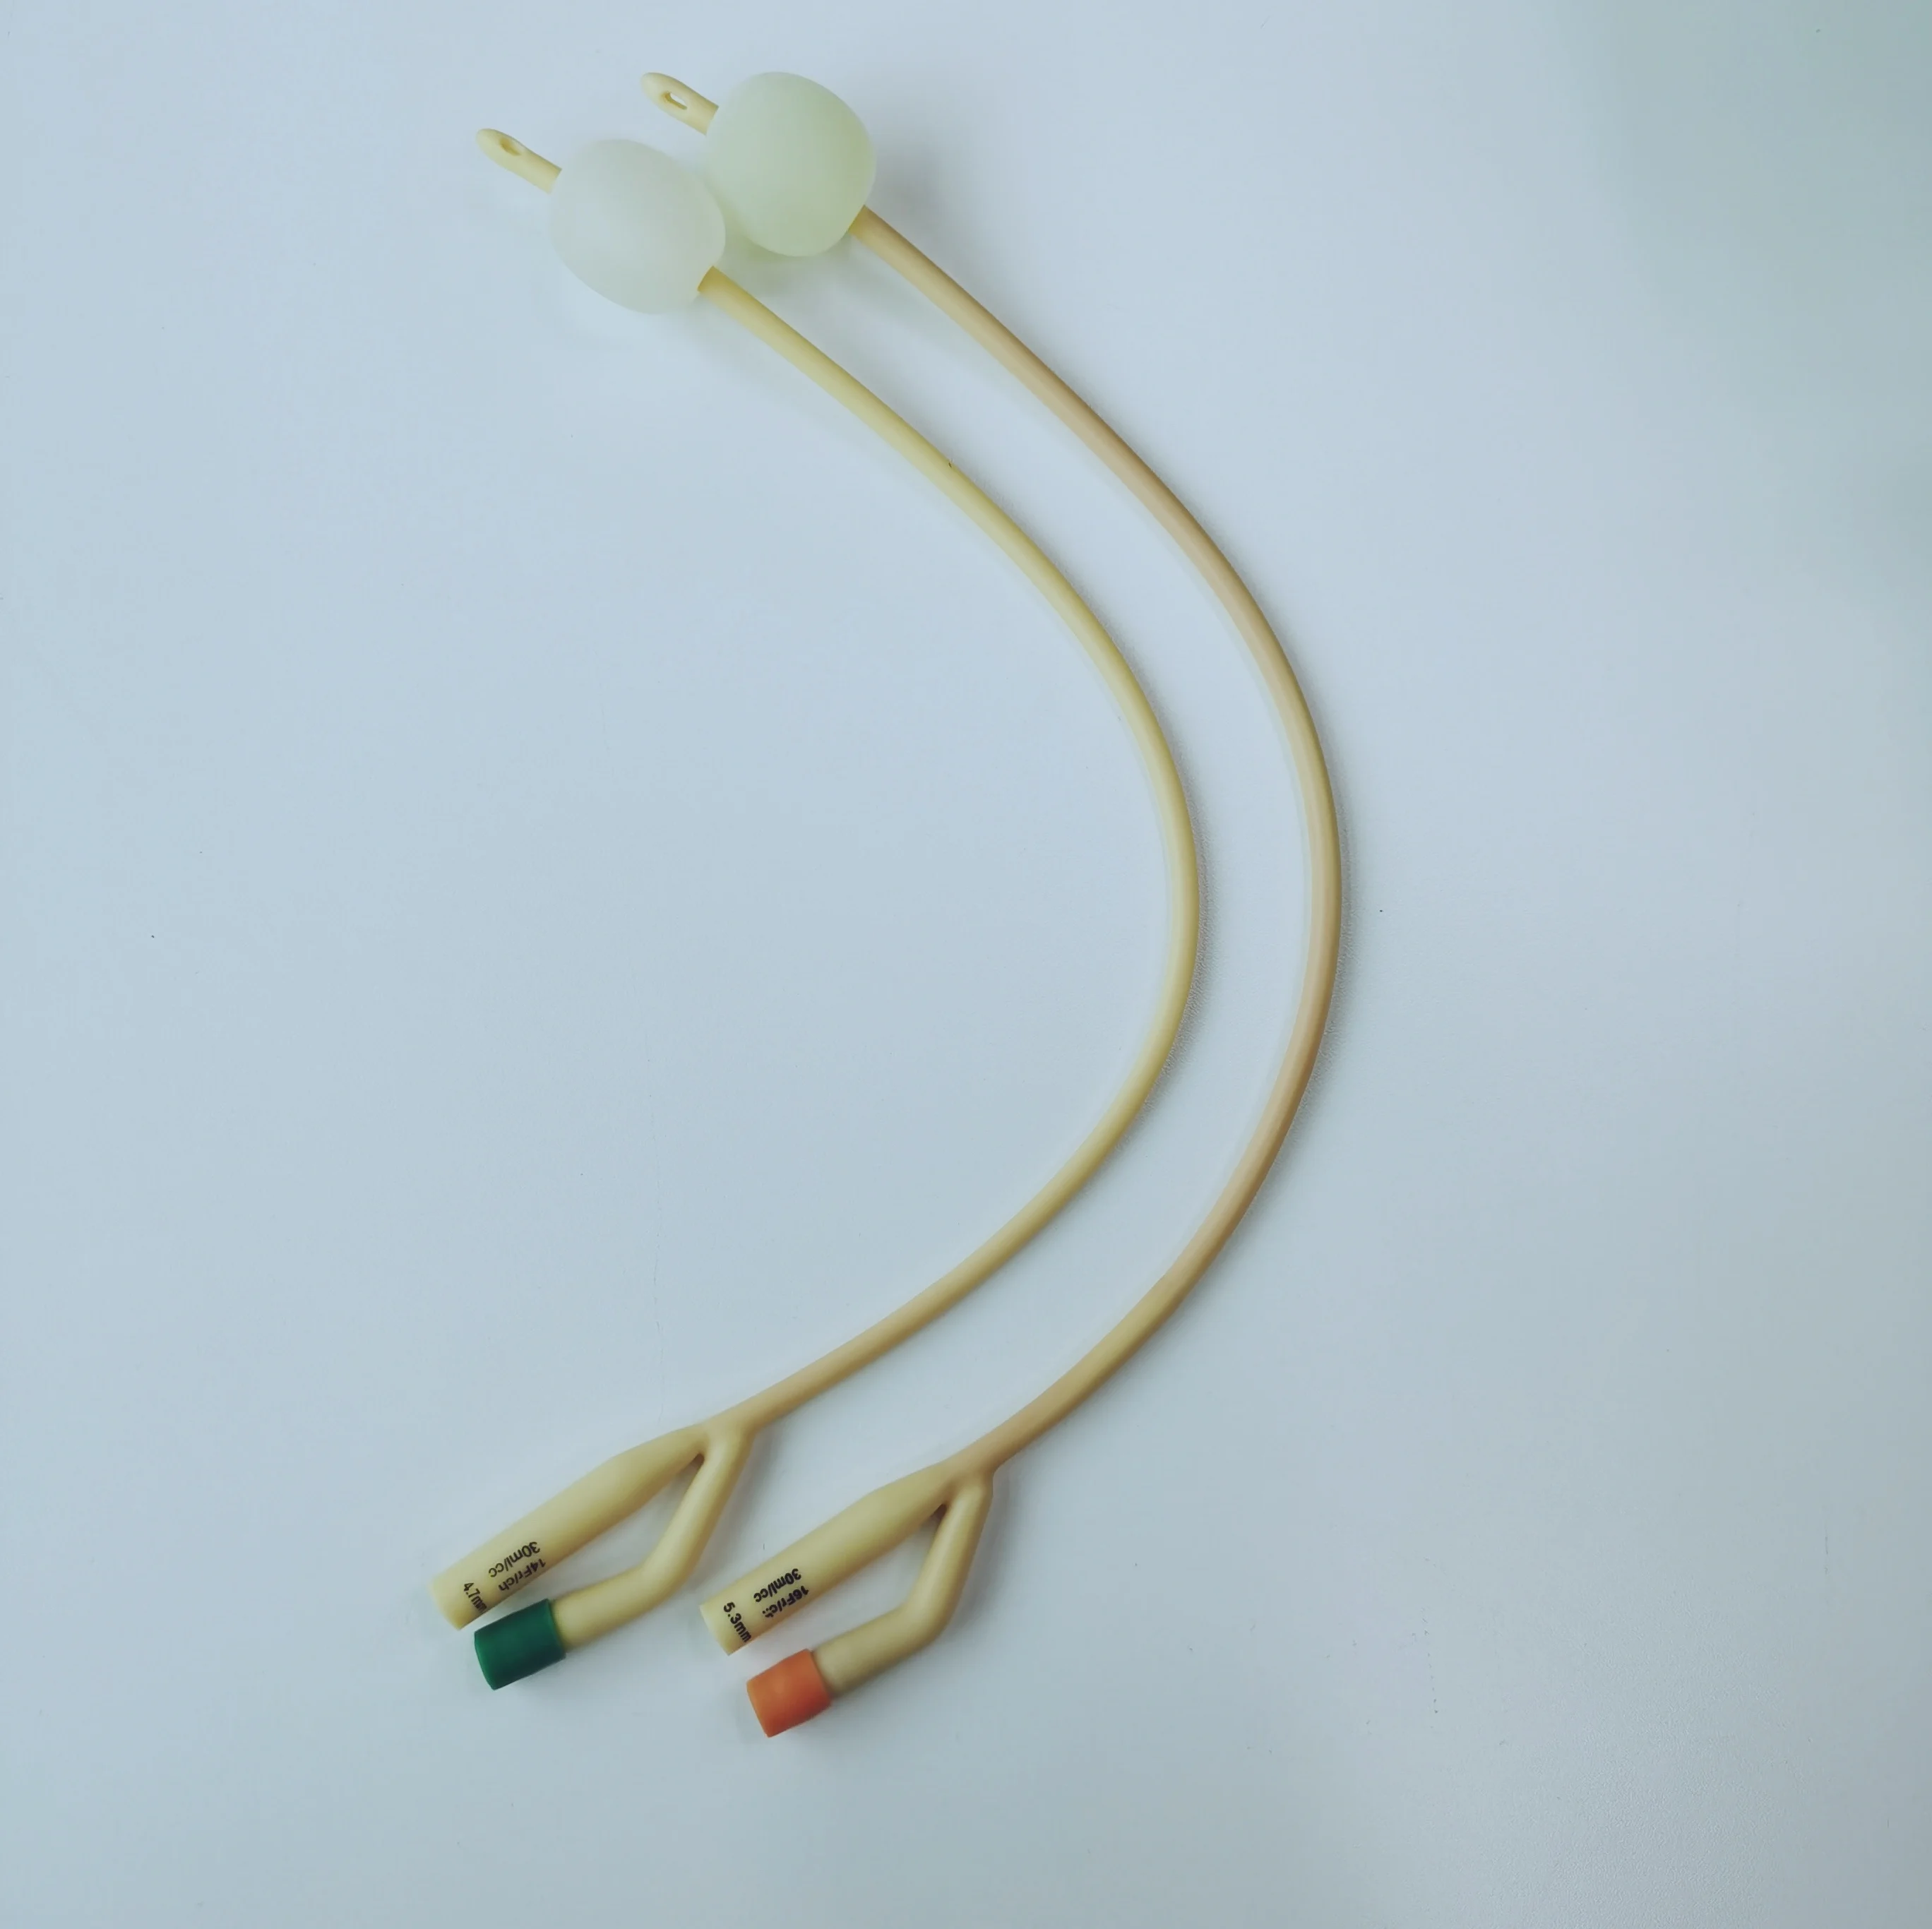 sterile latex Foley catheter for urology 2-way and 3-way OEM available and free good bio-compatibility factory outlet